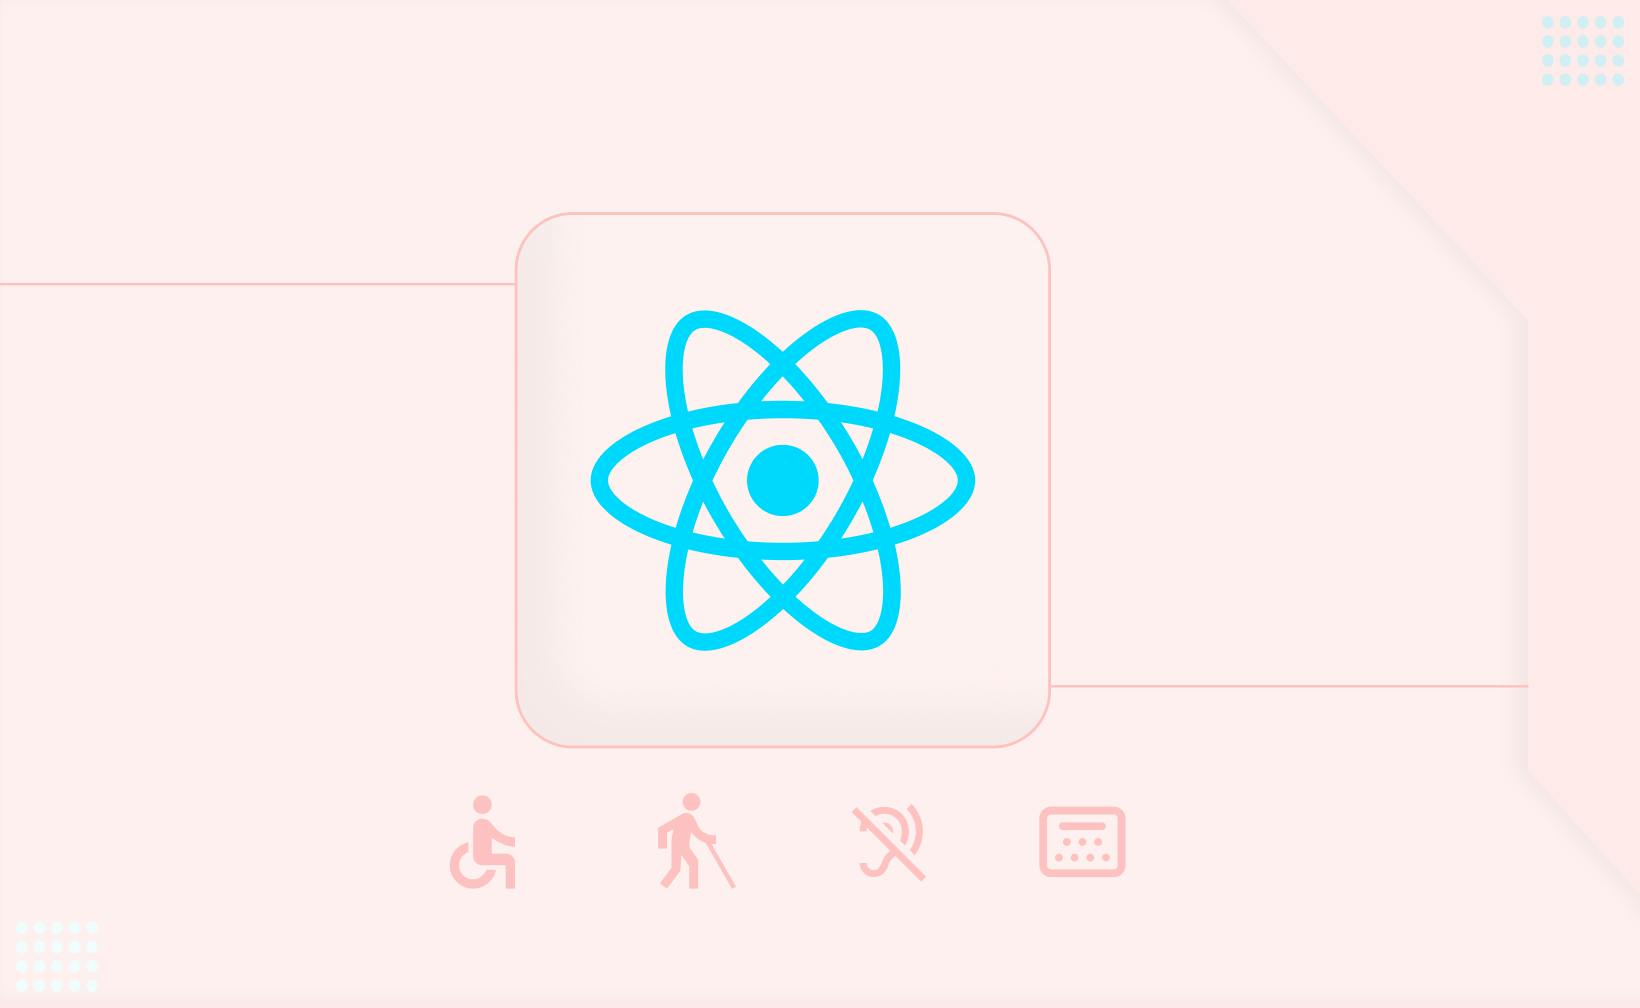 Web Accessibility in Reactjs